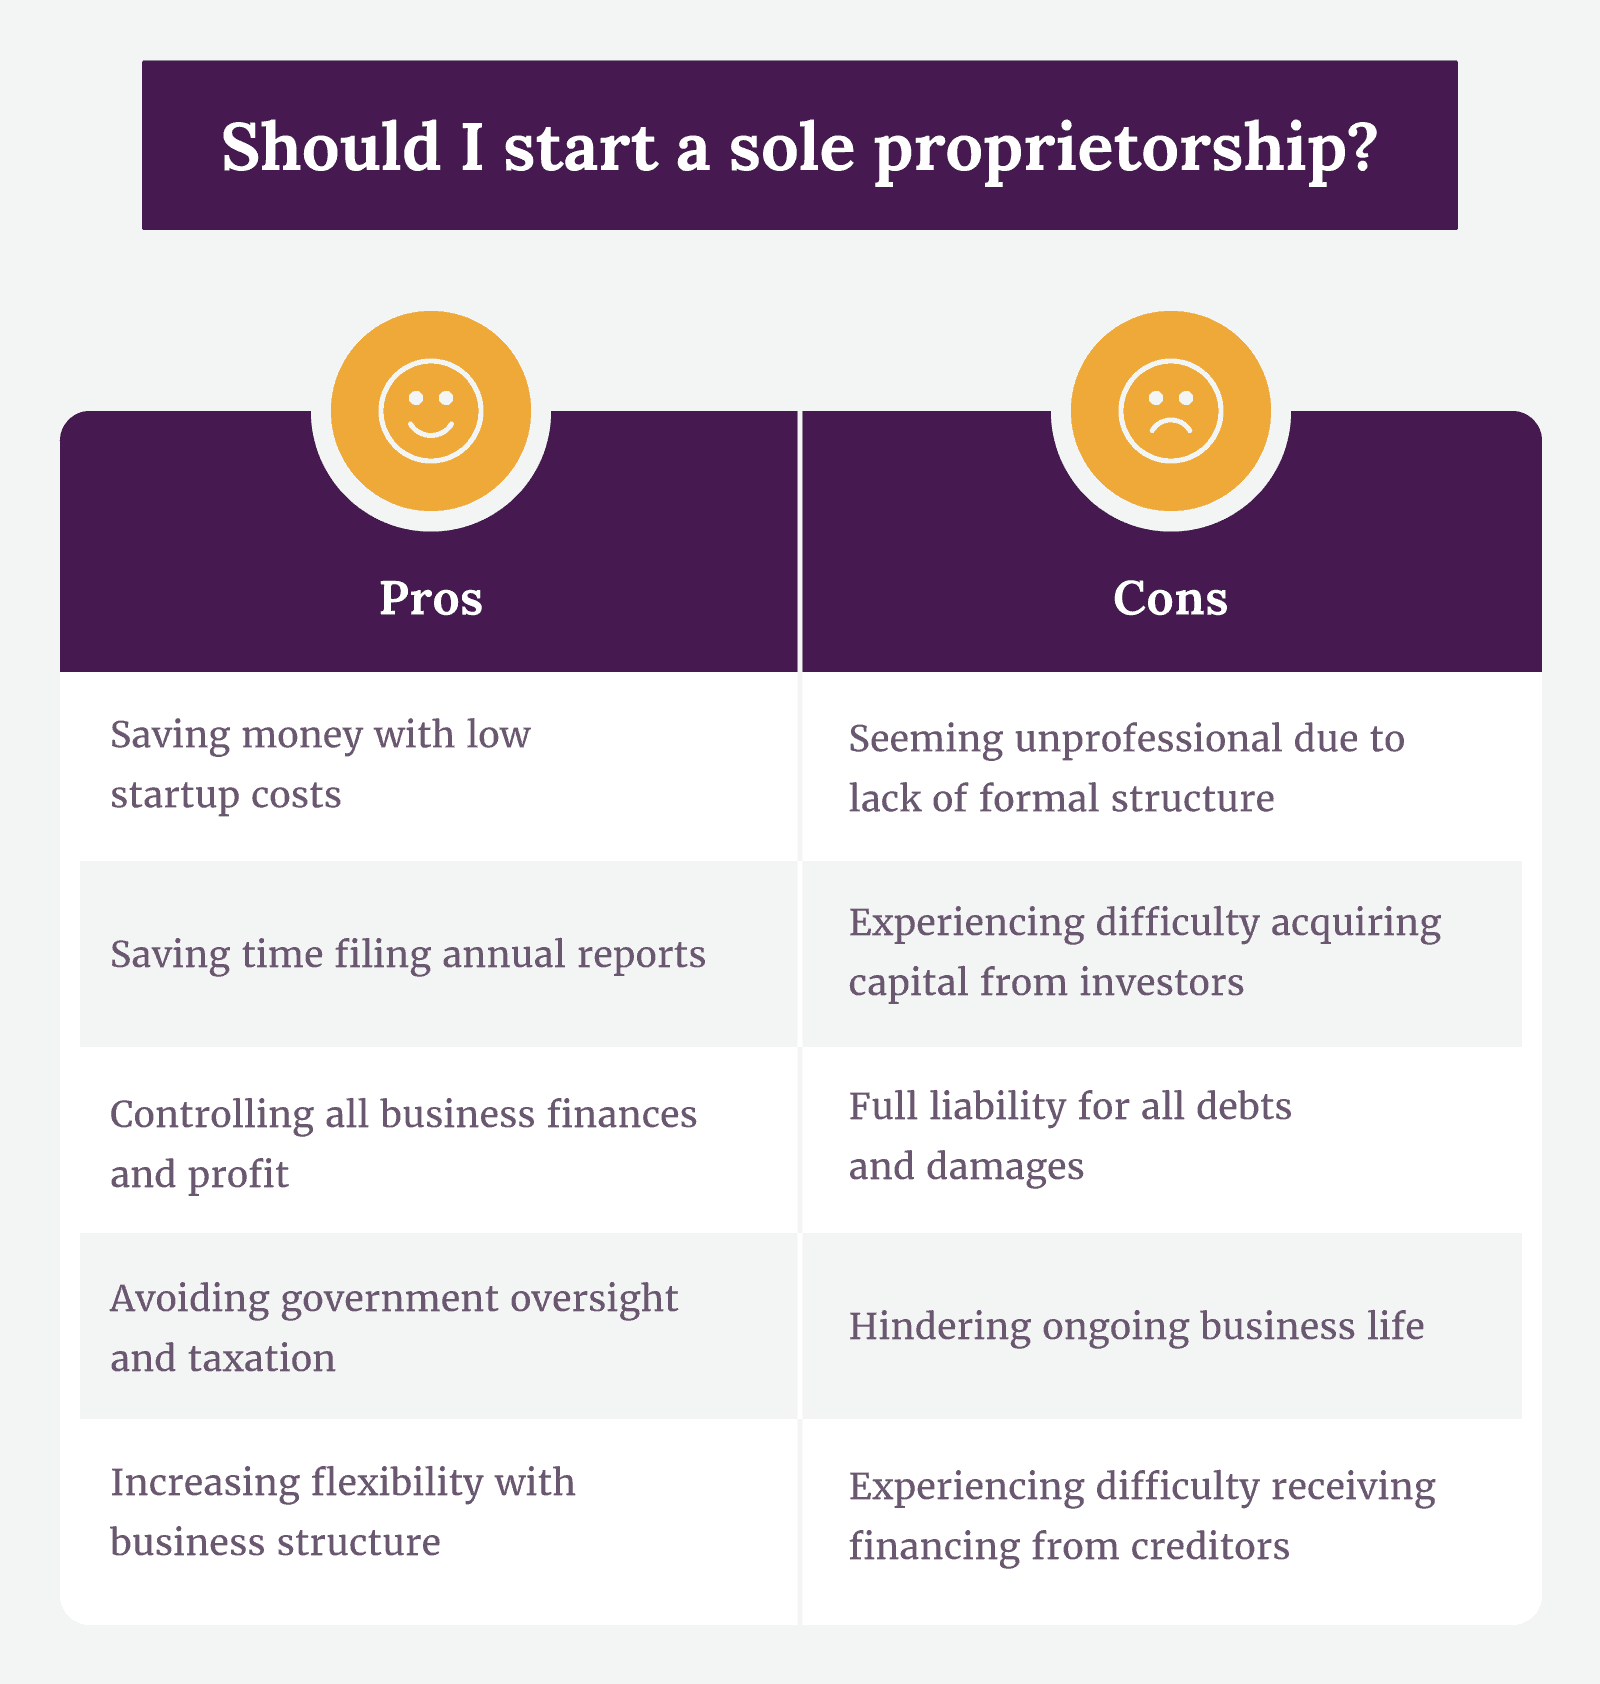 Pros and cons of starting a sole proprietorship